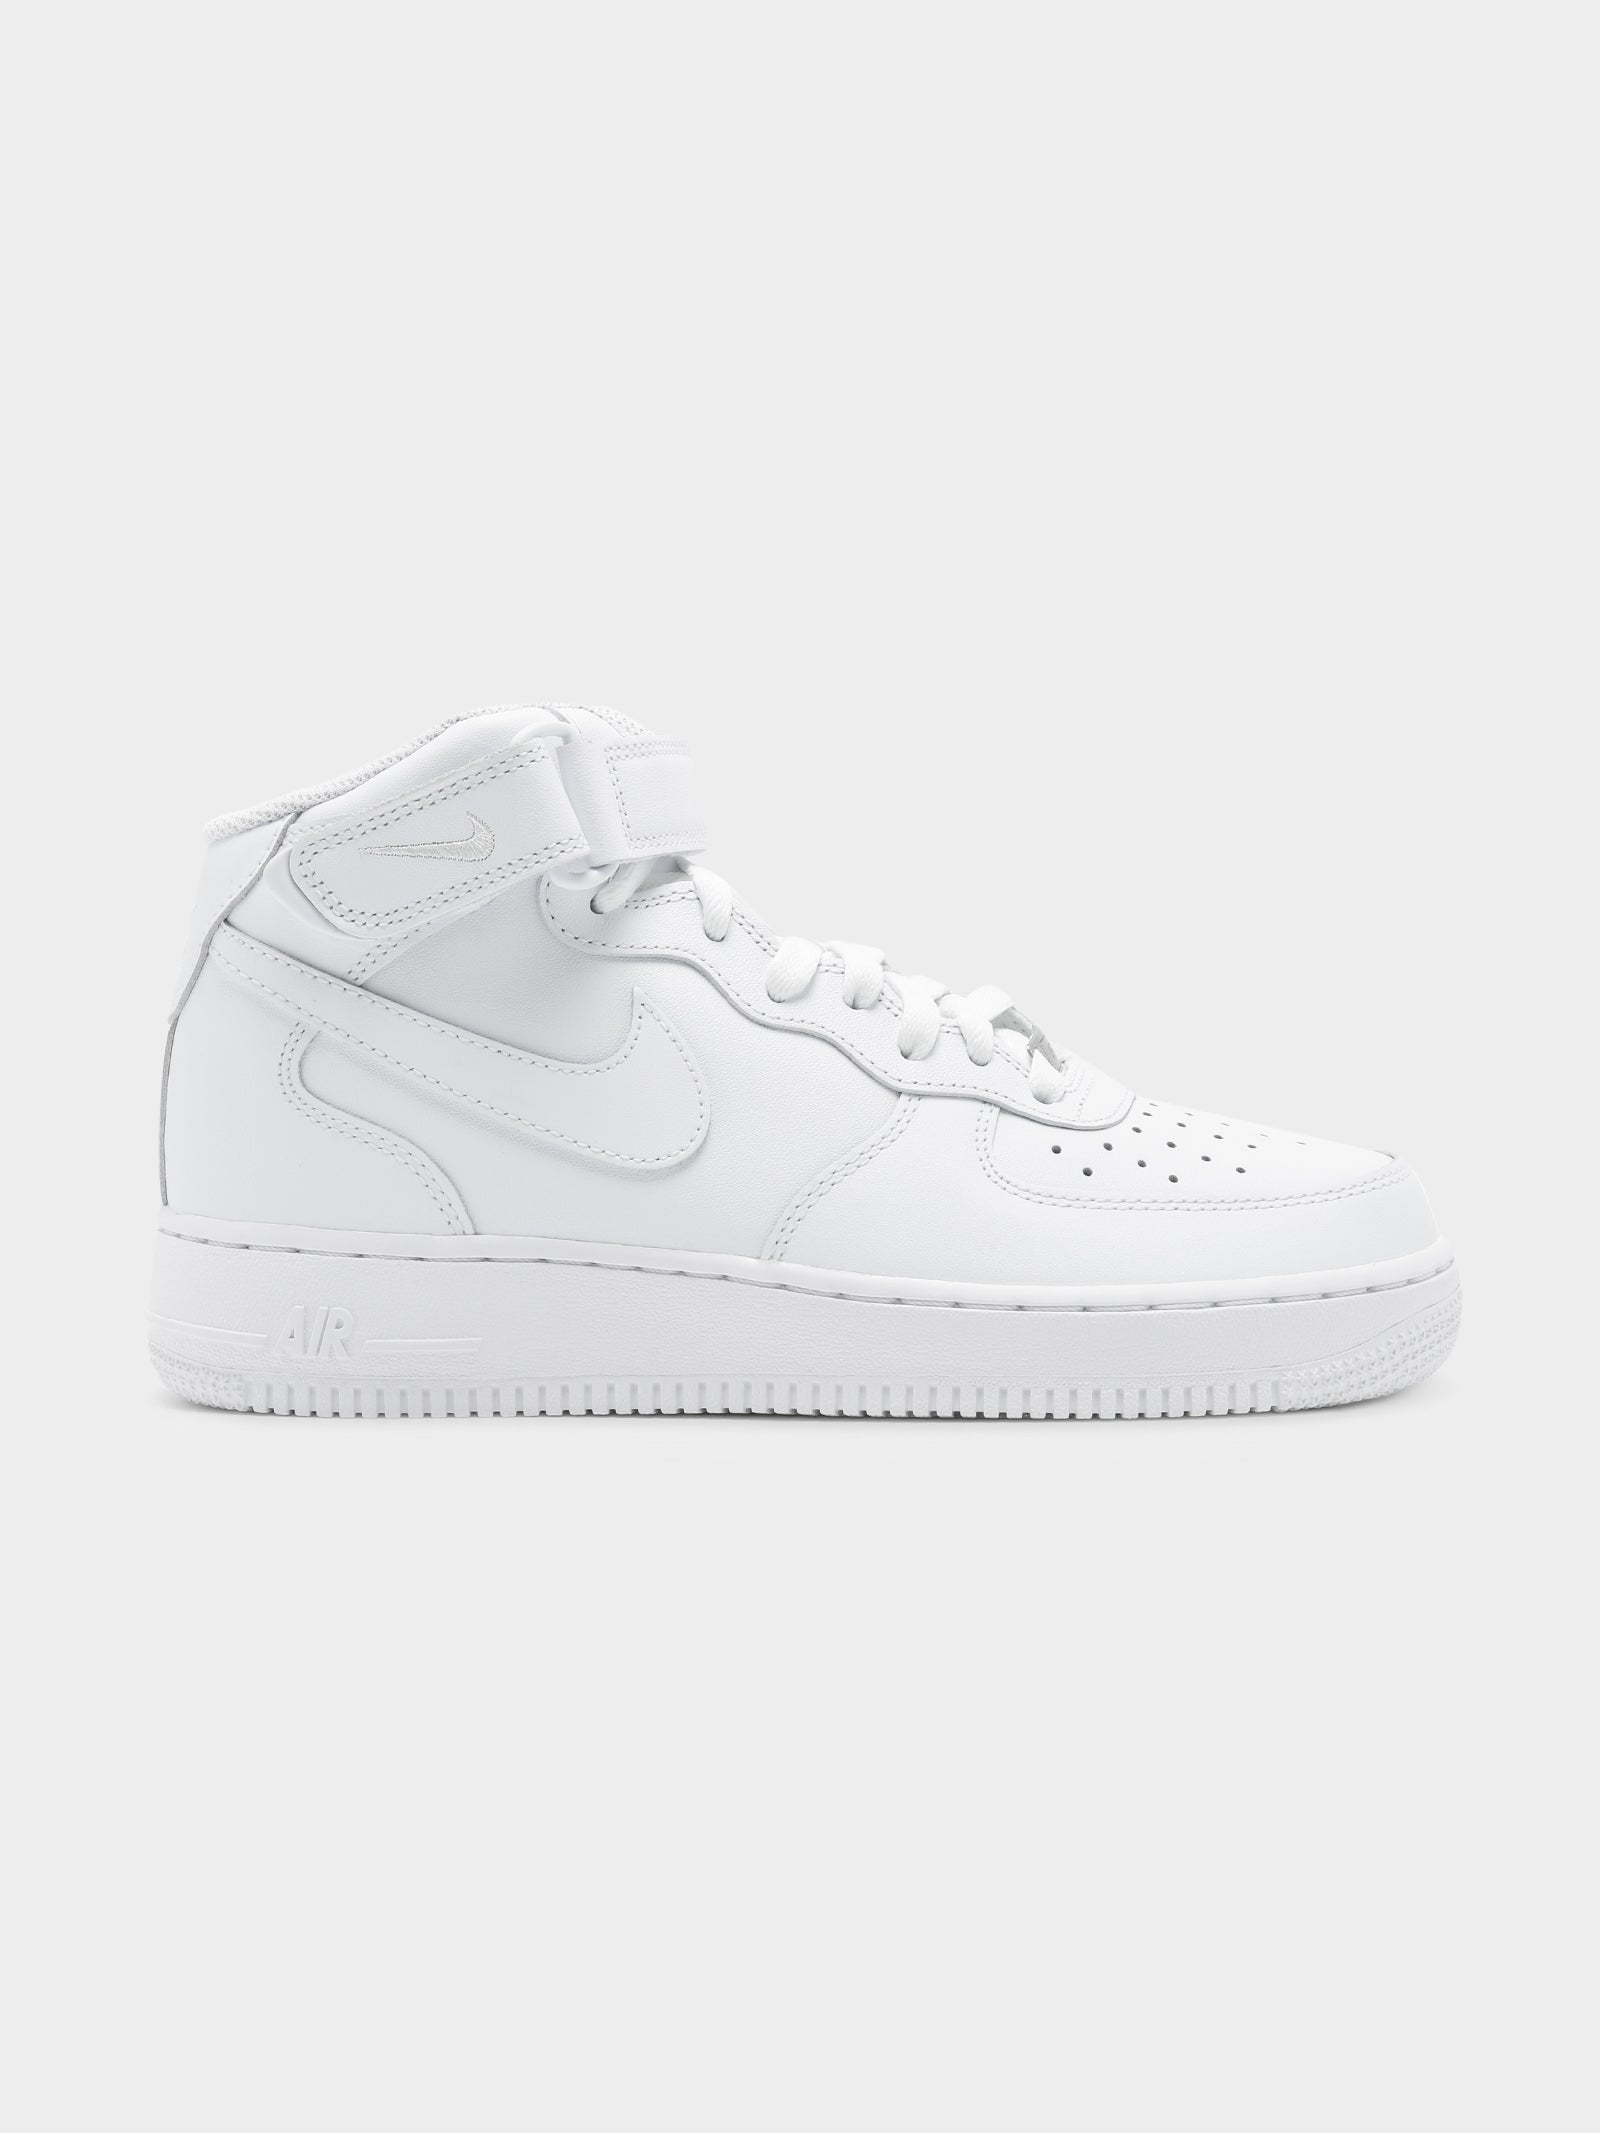 Womens Nike Air Force 1 Mid in Triple White